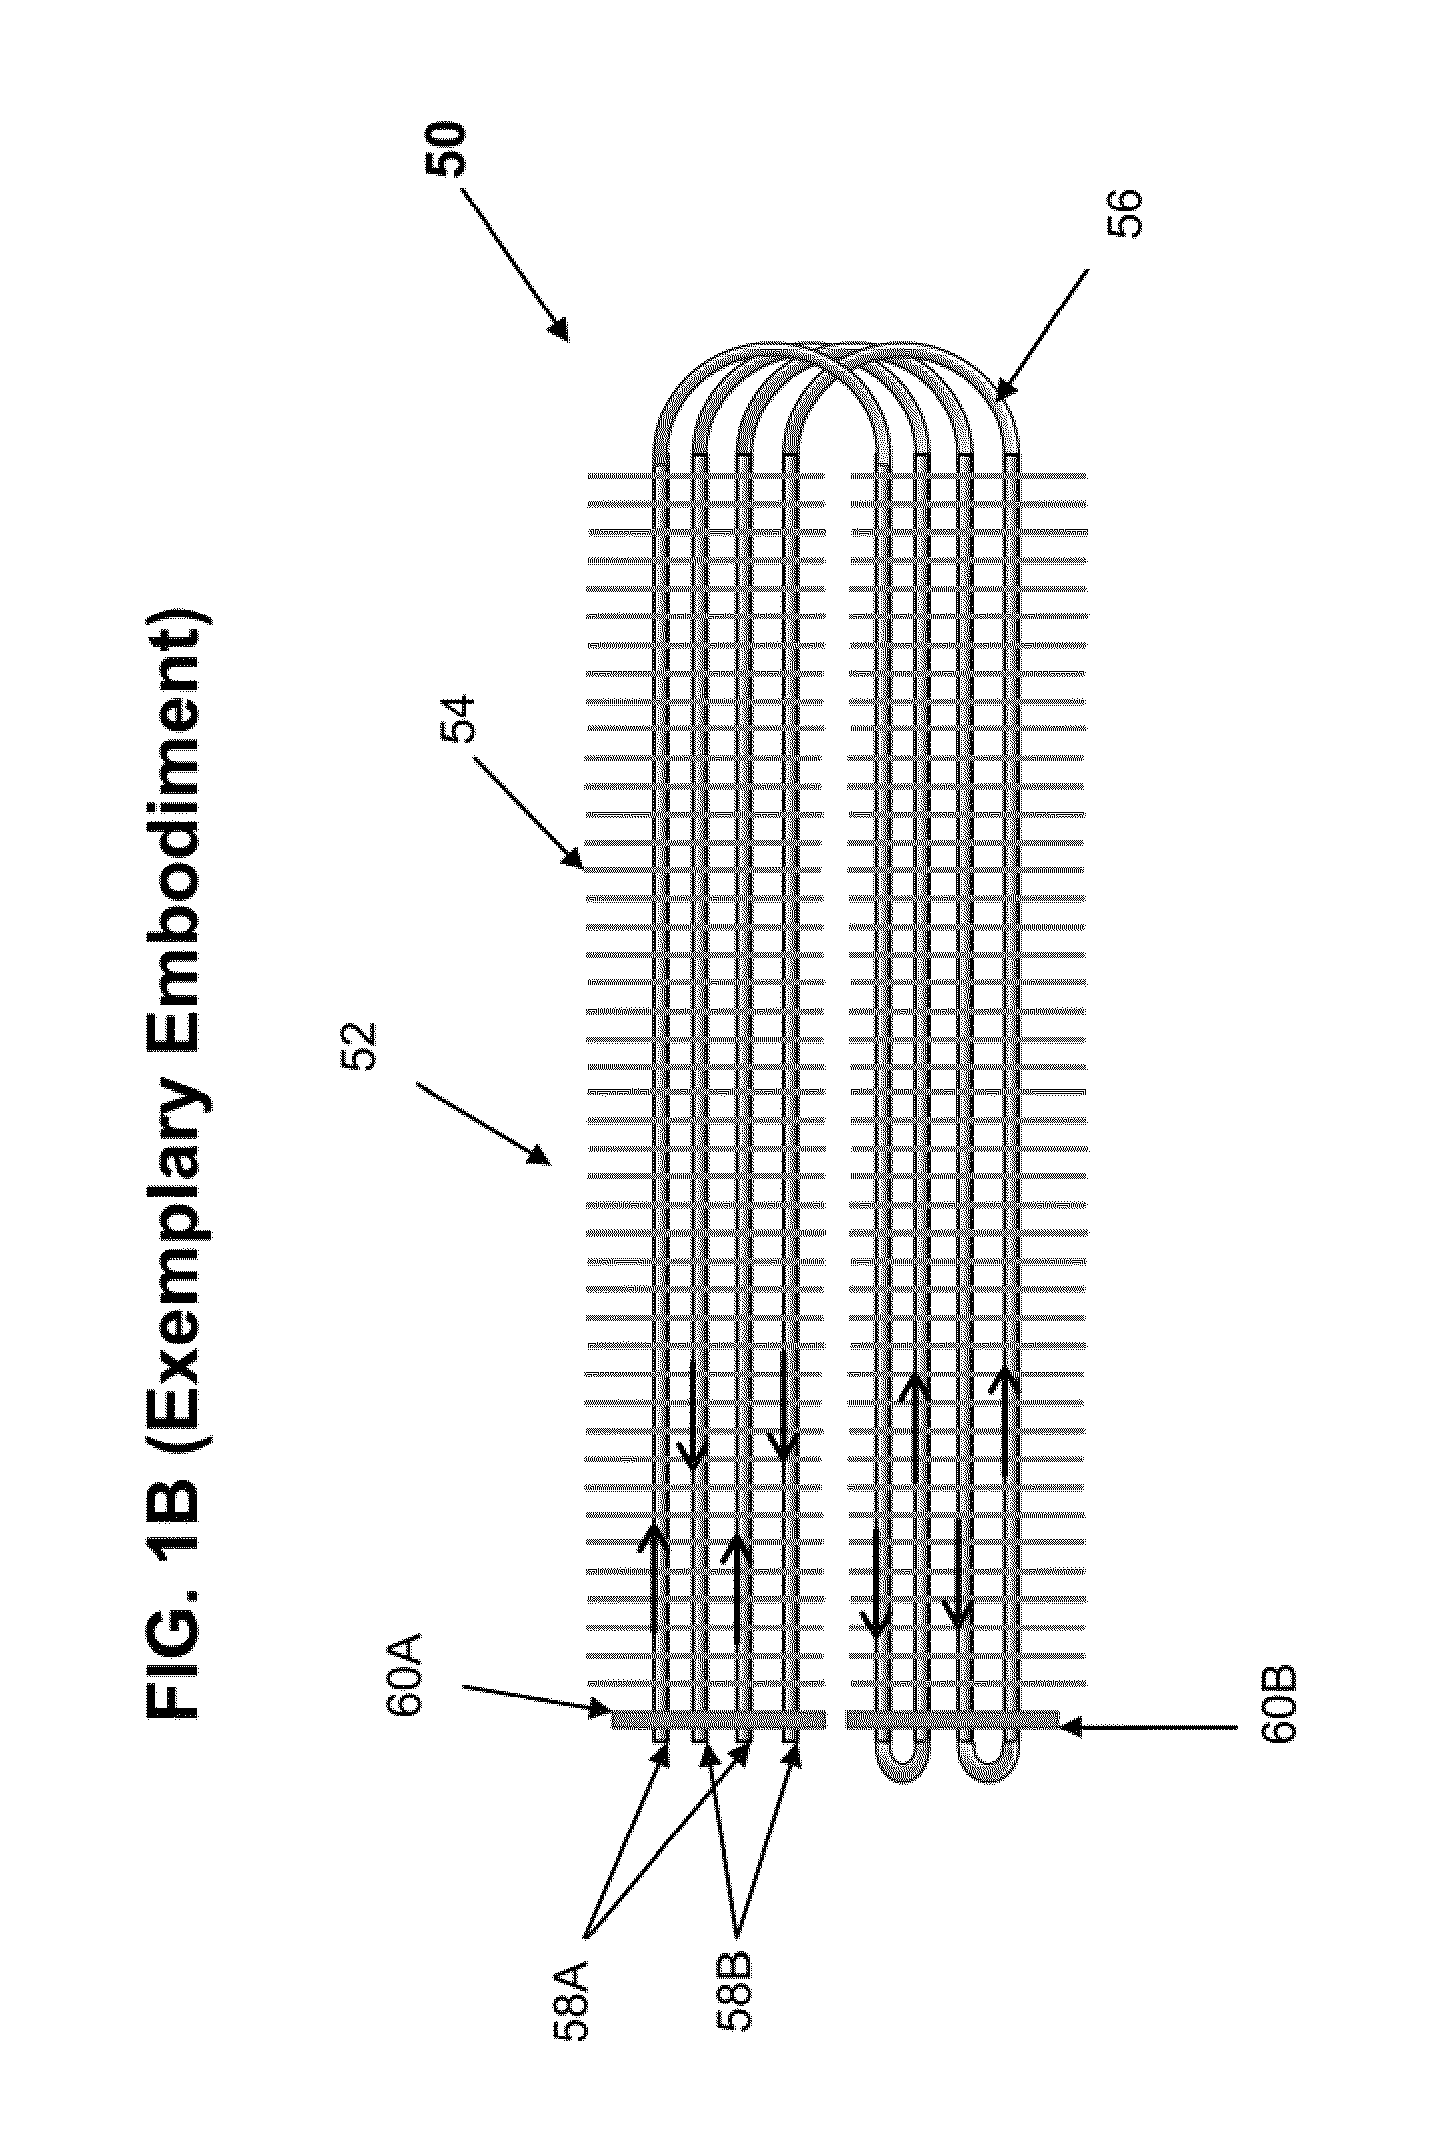 System and method for energy-saving inductive heating of evaporators and other heat-exchangers